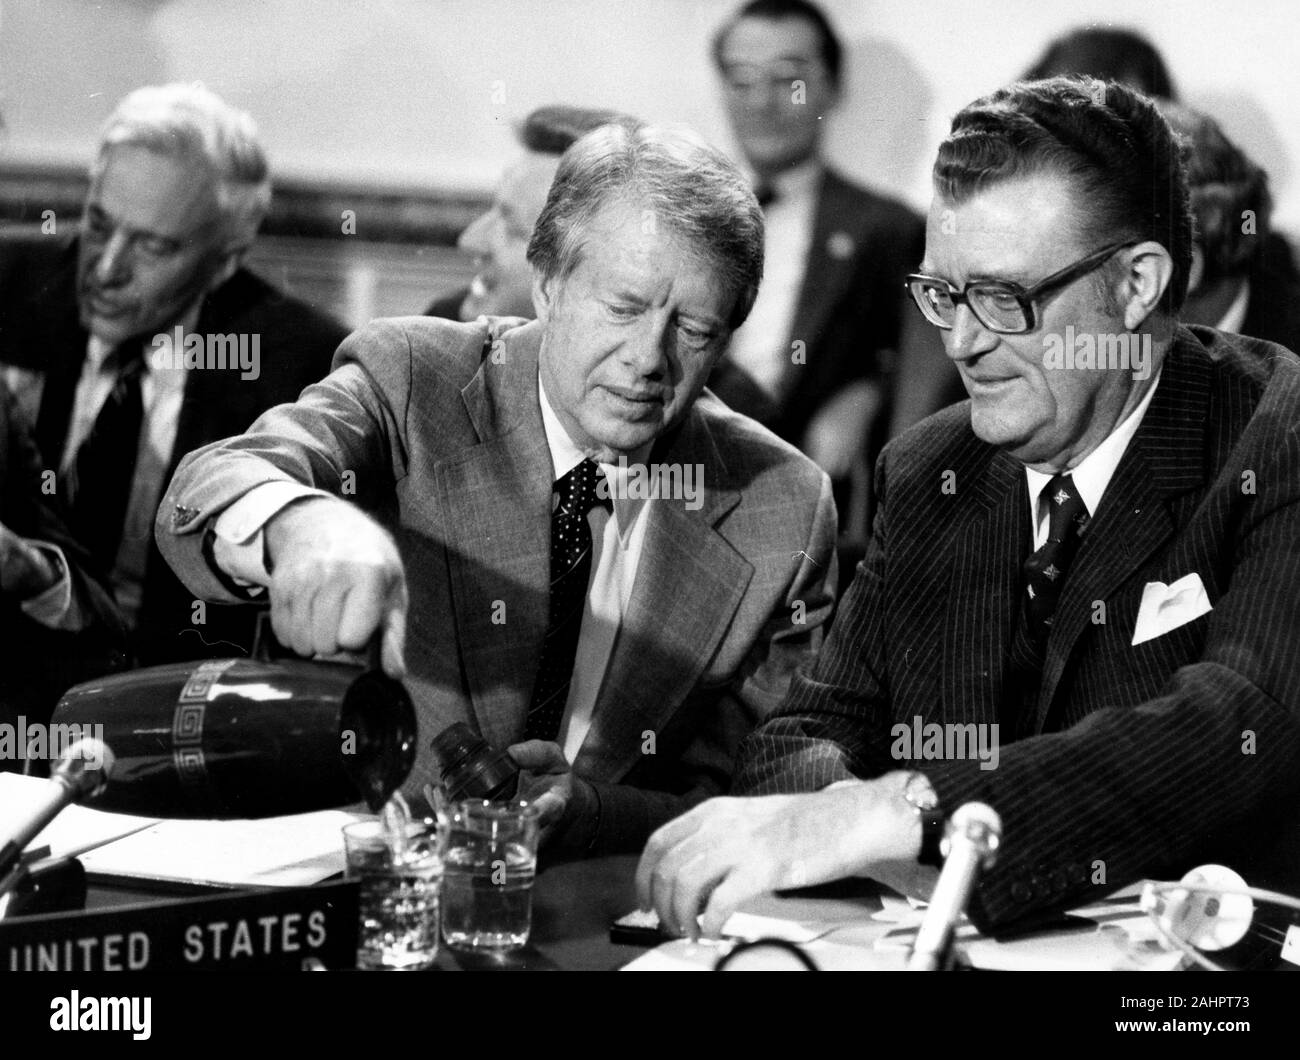 May 10, 1977 - London, England, United Kingdom - U.S. President JIMMY CARTER pours water for U.S. Permanent Representative to NATO TAPLEY BENNETT JR during the Ministerial meeting of North Atlantic Treaty Organization, NATO, London opening session at Lancaster House. Lancaster House (previously known as York House and Stafford House) is a mansion in the St. James's district in the West End of London (Credit Image: © Keystone Press Agency/Keystone USA via ZUMAPRESS.com) Stock Photo